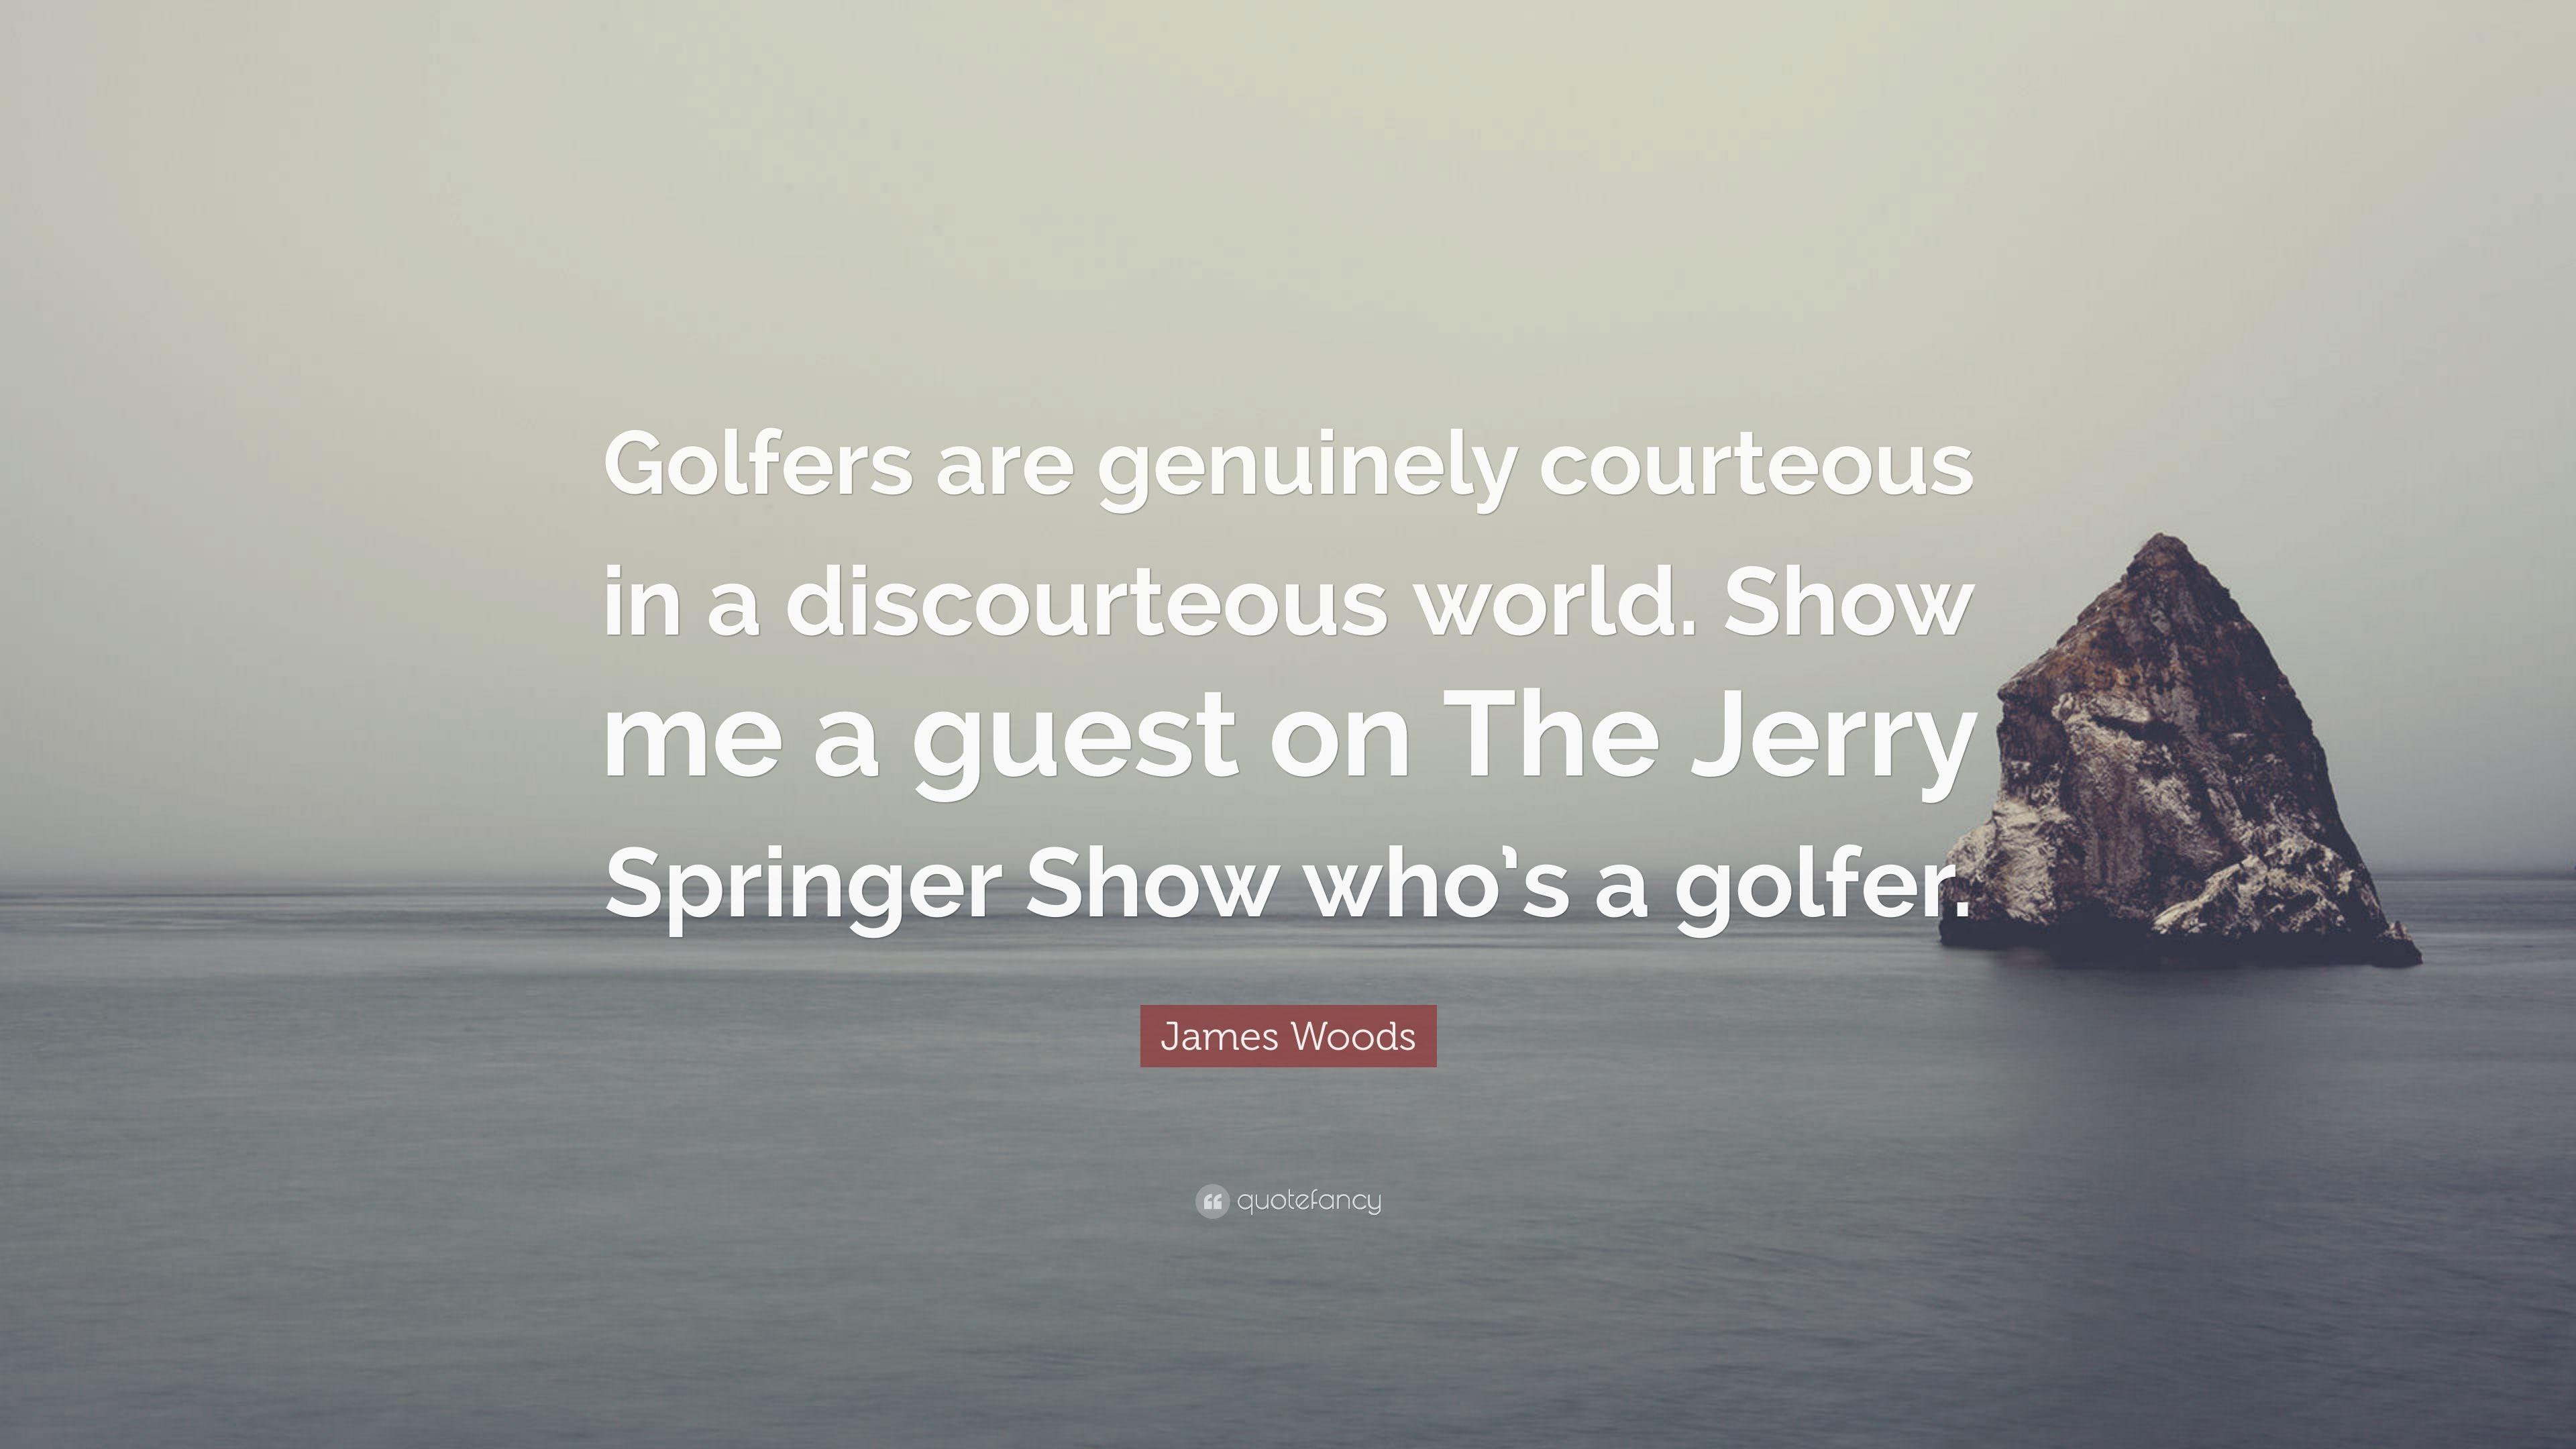 James Woods Quote: “Golfers are genuinely courteous in a